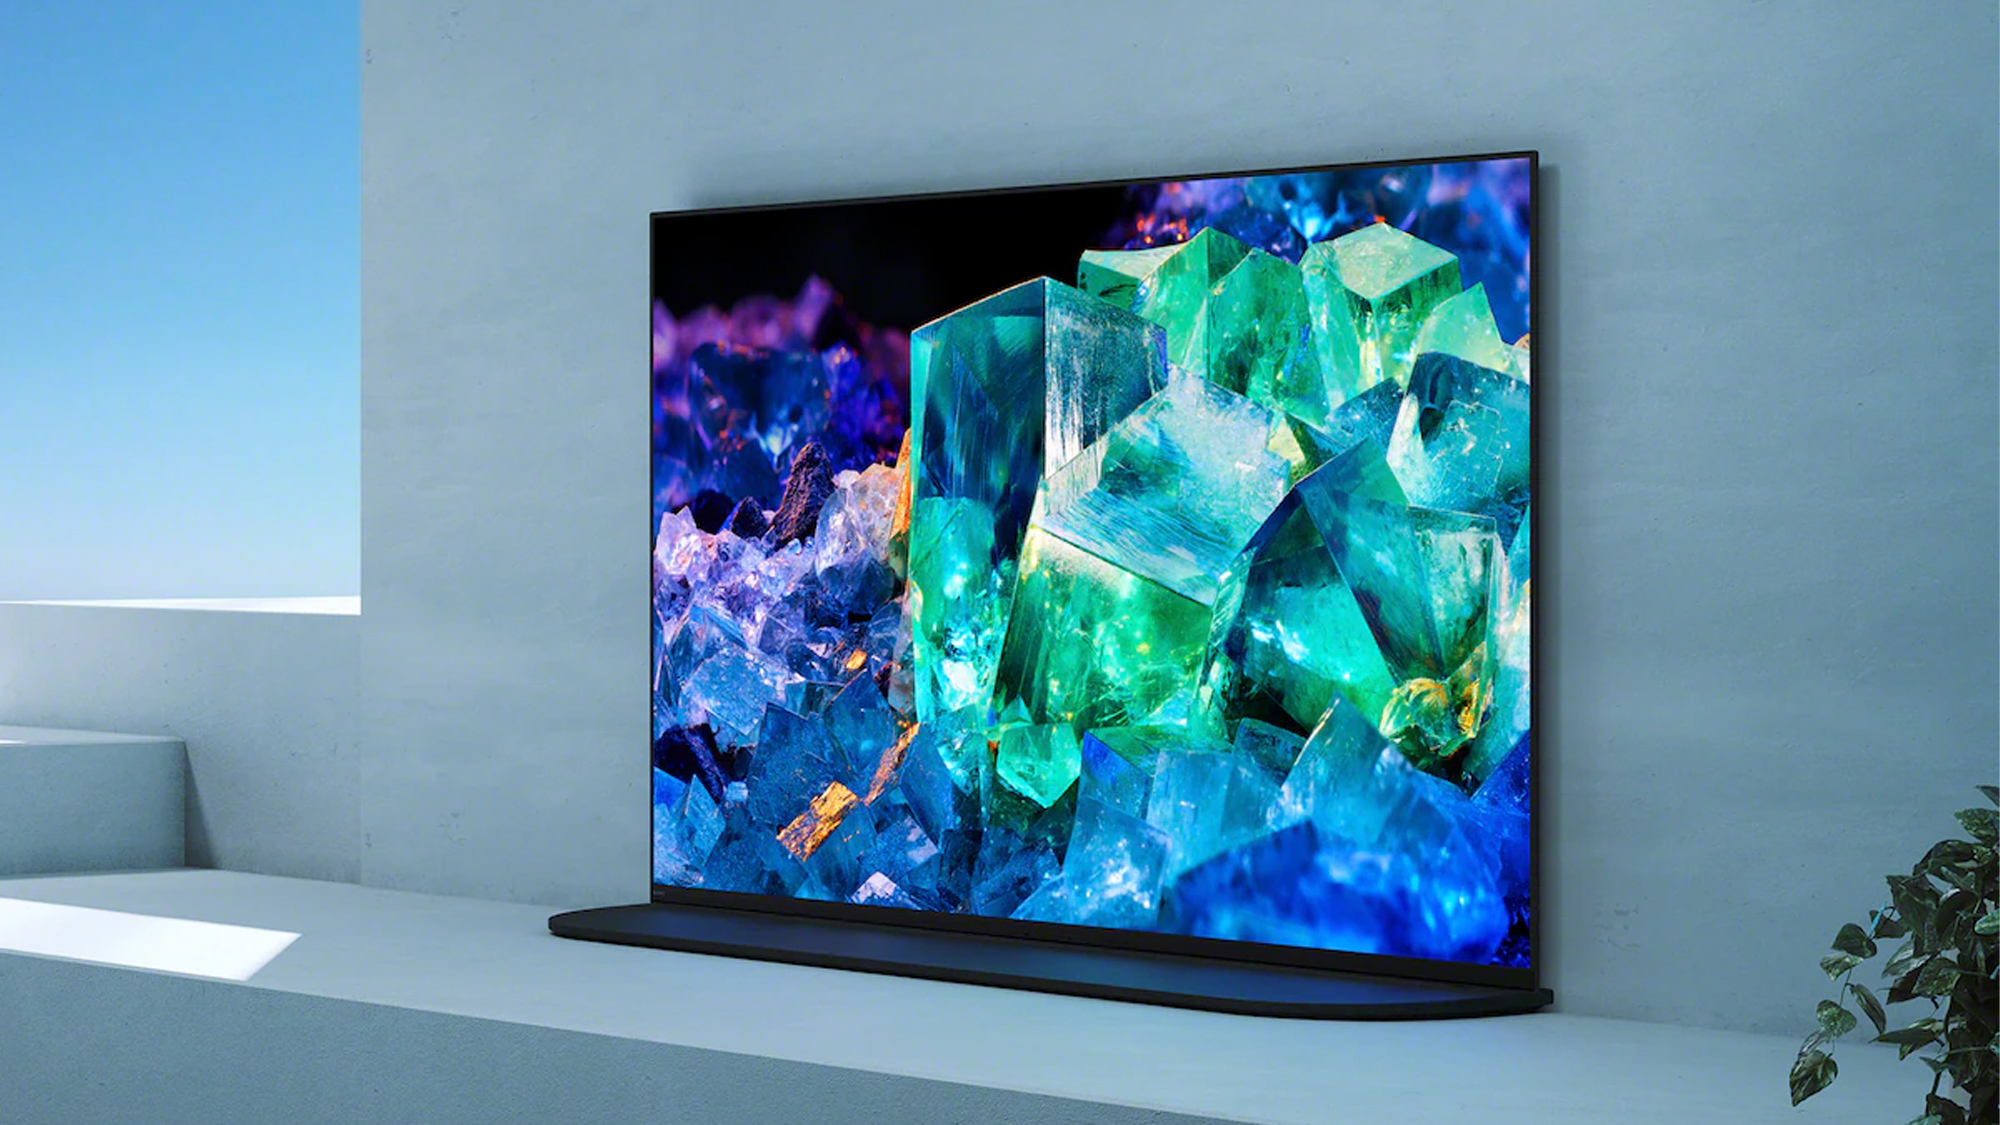 Sony A95K OLED TV Review: An OLED Master Class - Reviewed